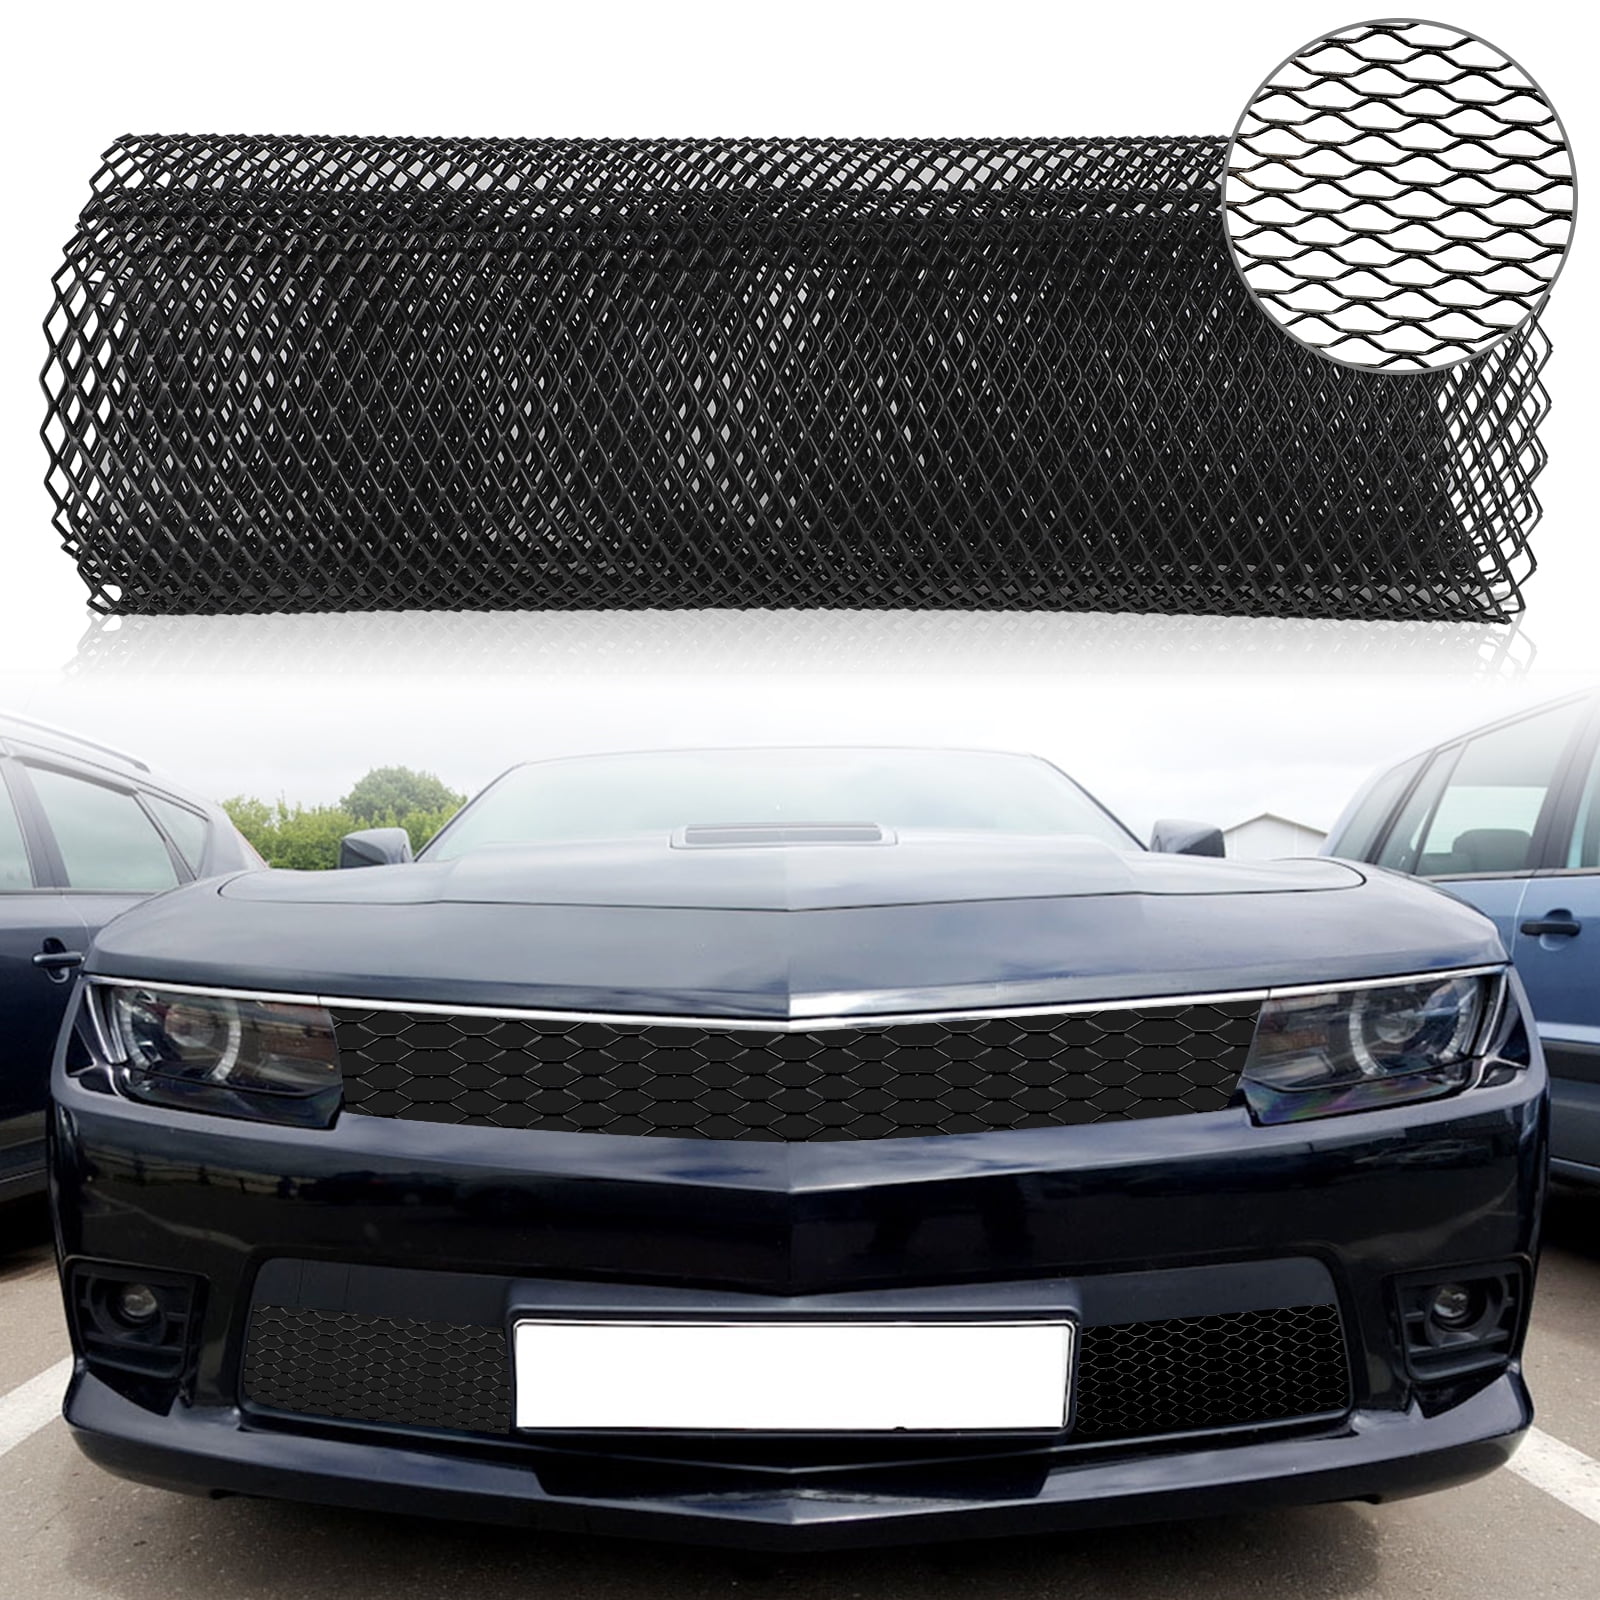 100 Pieces 33cm Universal Aluminum Grille Net Mesh Grill Section for Car 